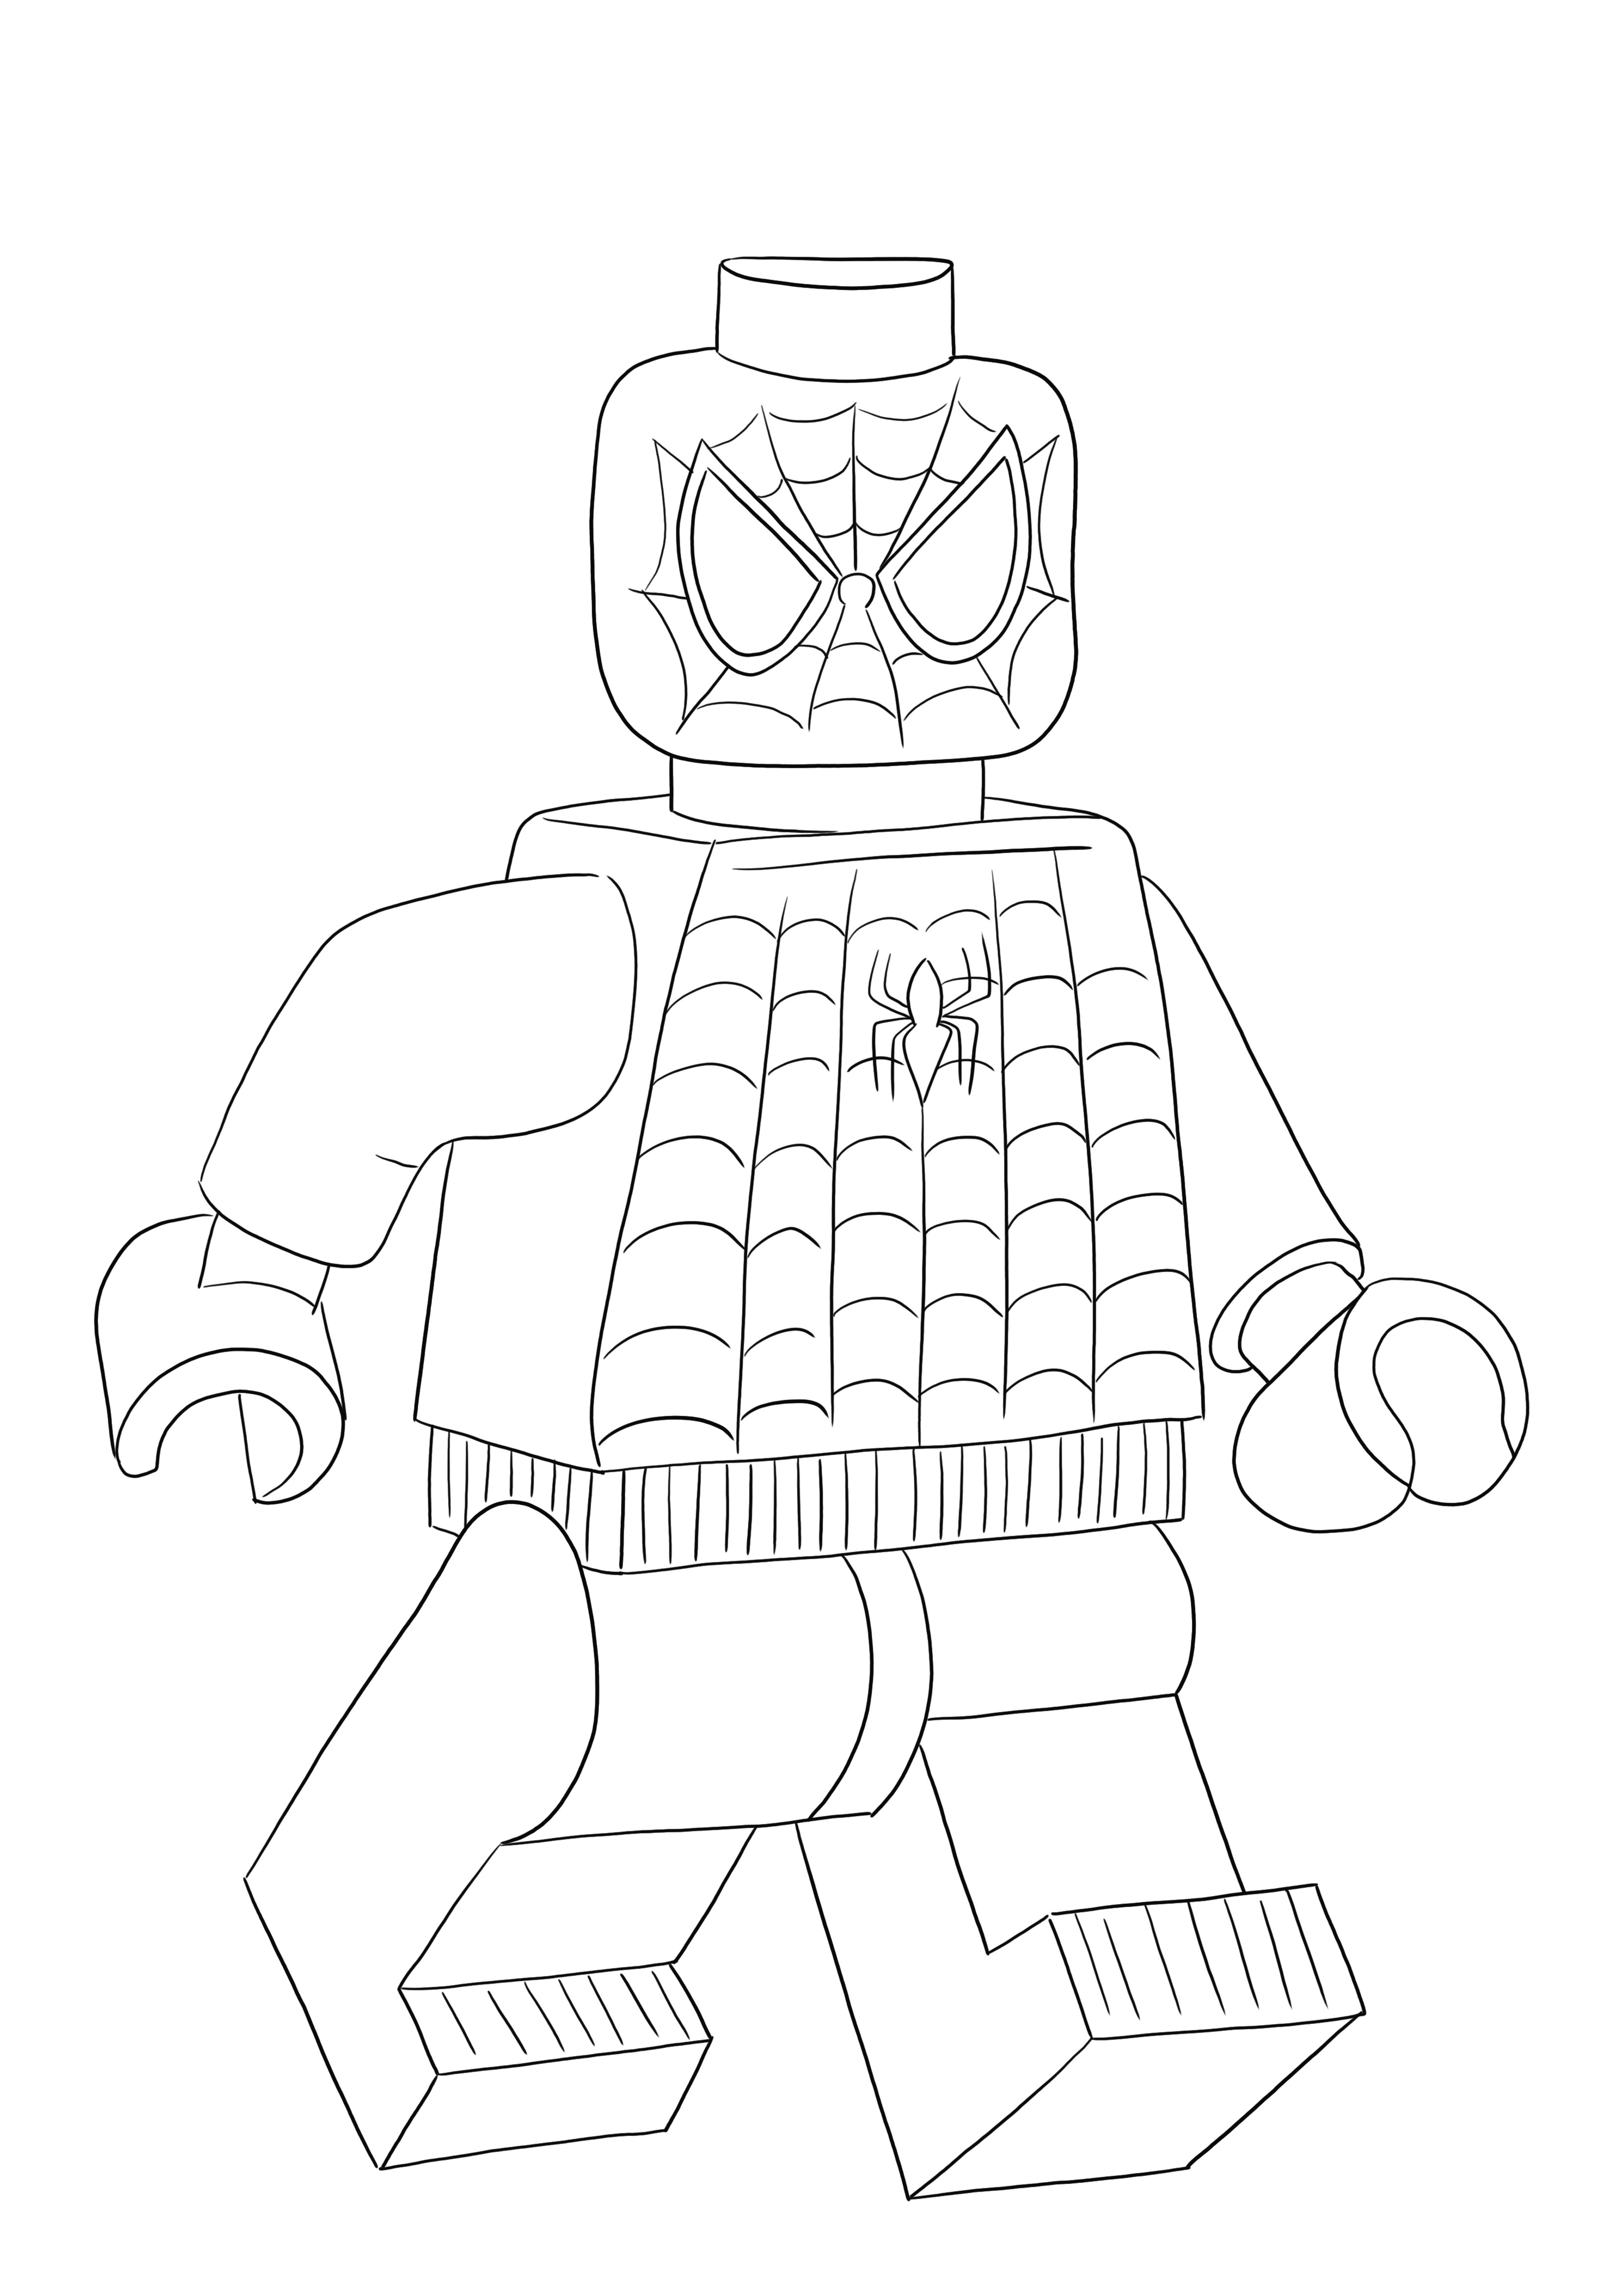 Lego Spiderman freebie is ready to be colored and have fun for all Lego lovers